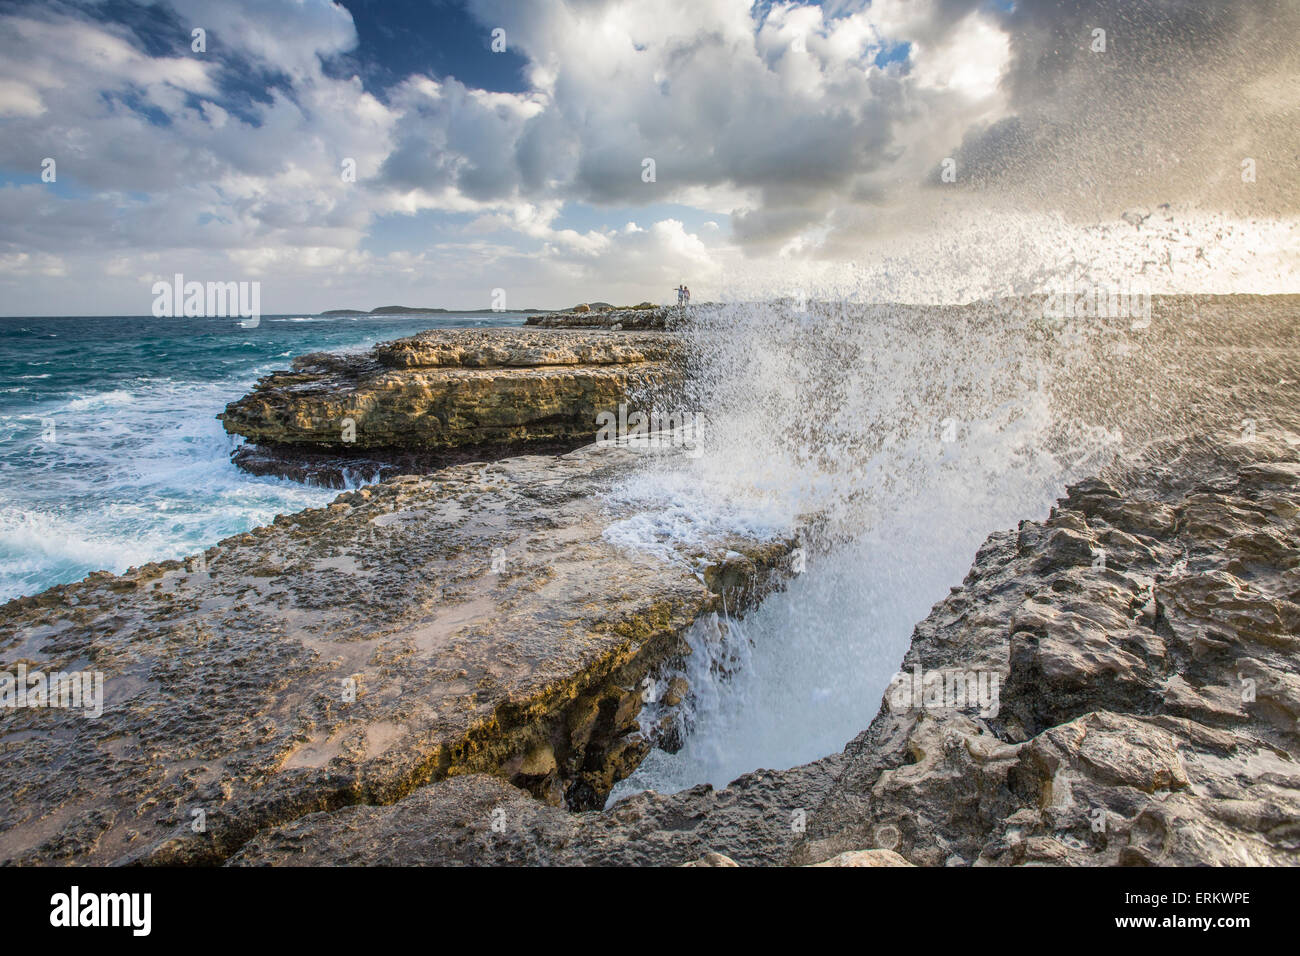 A wave created by the strong wind squirts water over Devils Bridge, a coral bridge created by wind and the power of sea, Antigua Stock Photo